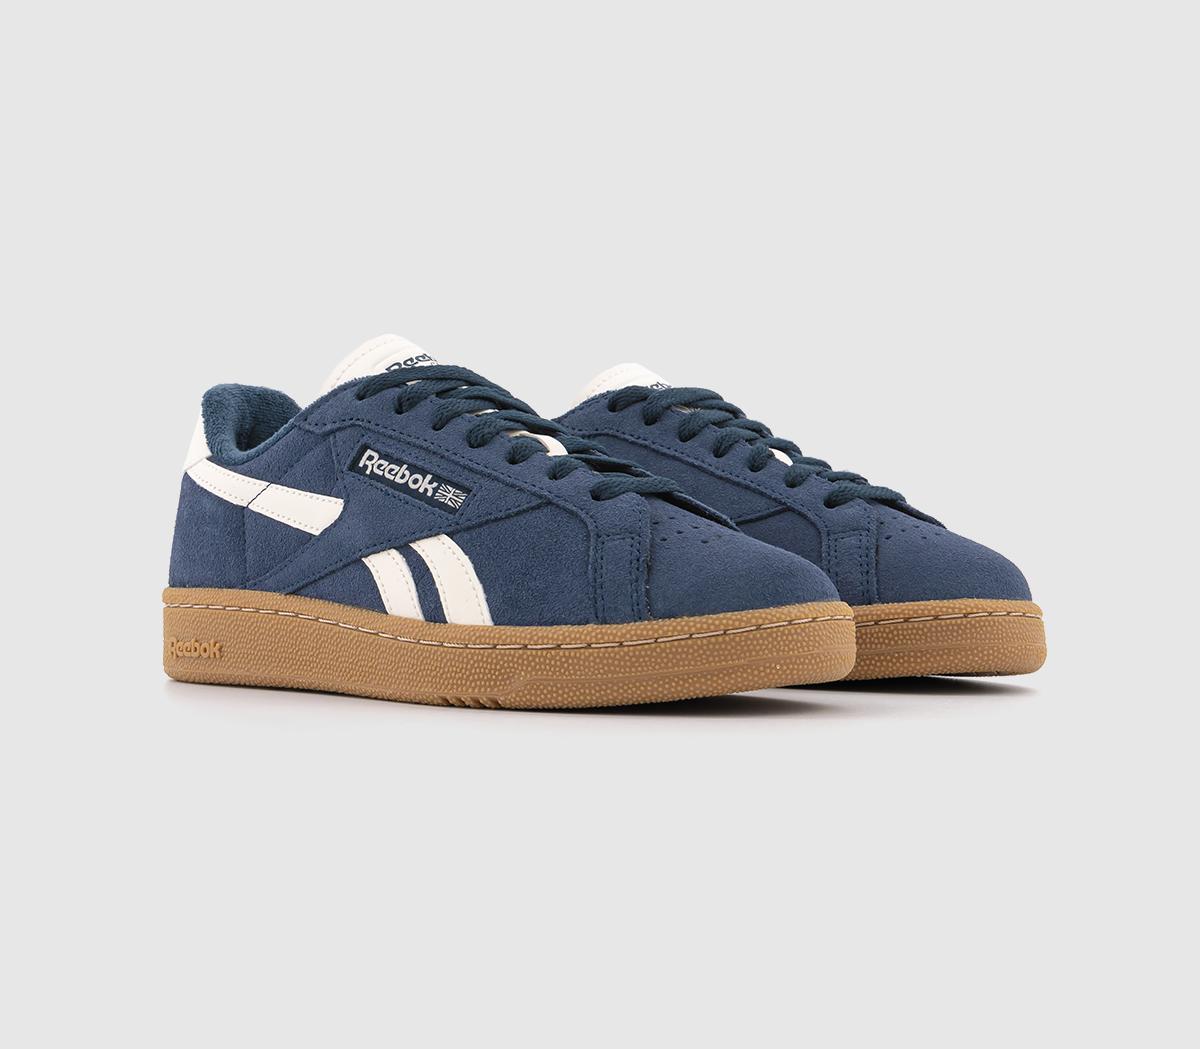 Reebok Womens Club C Grounds Trainers Vector Navy Blue, 4